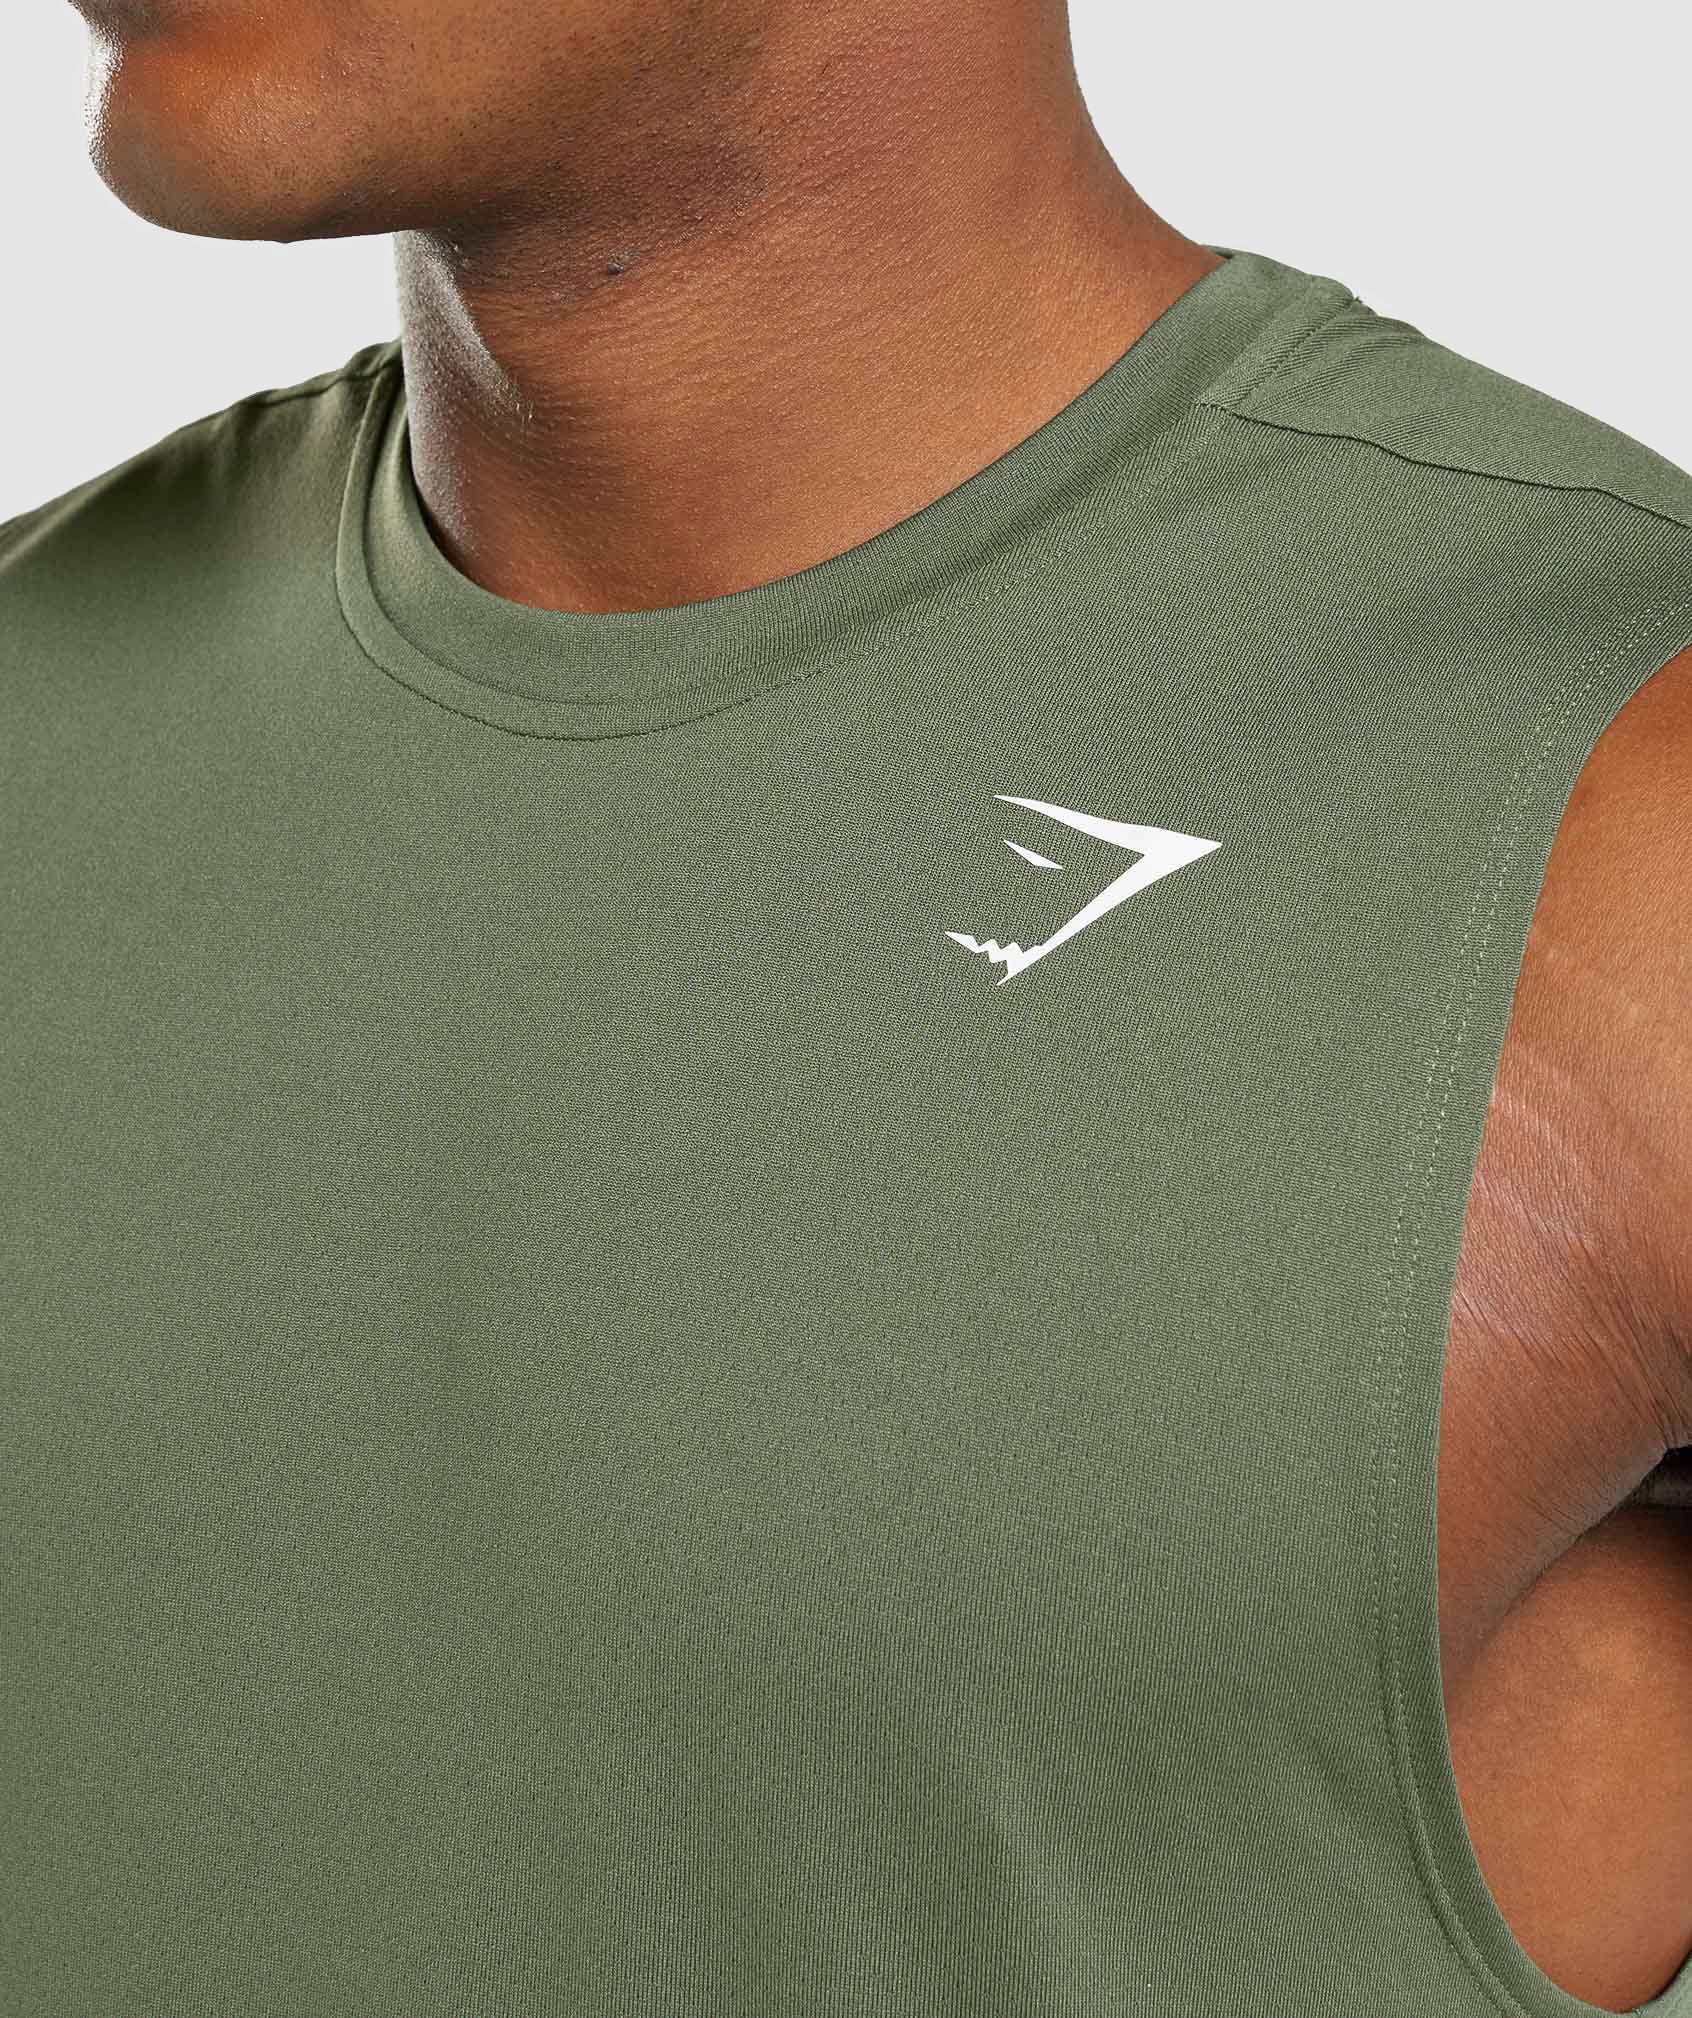 Arrival Sleeveless T-Shirt in Core Olive - view 5